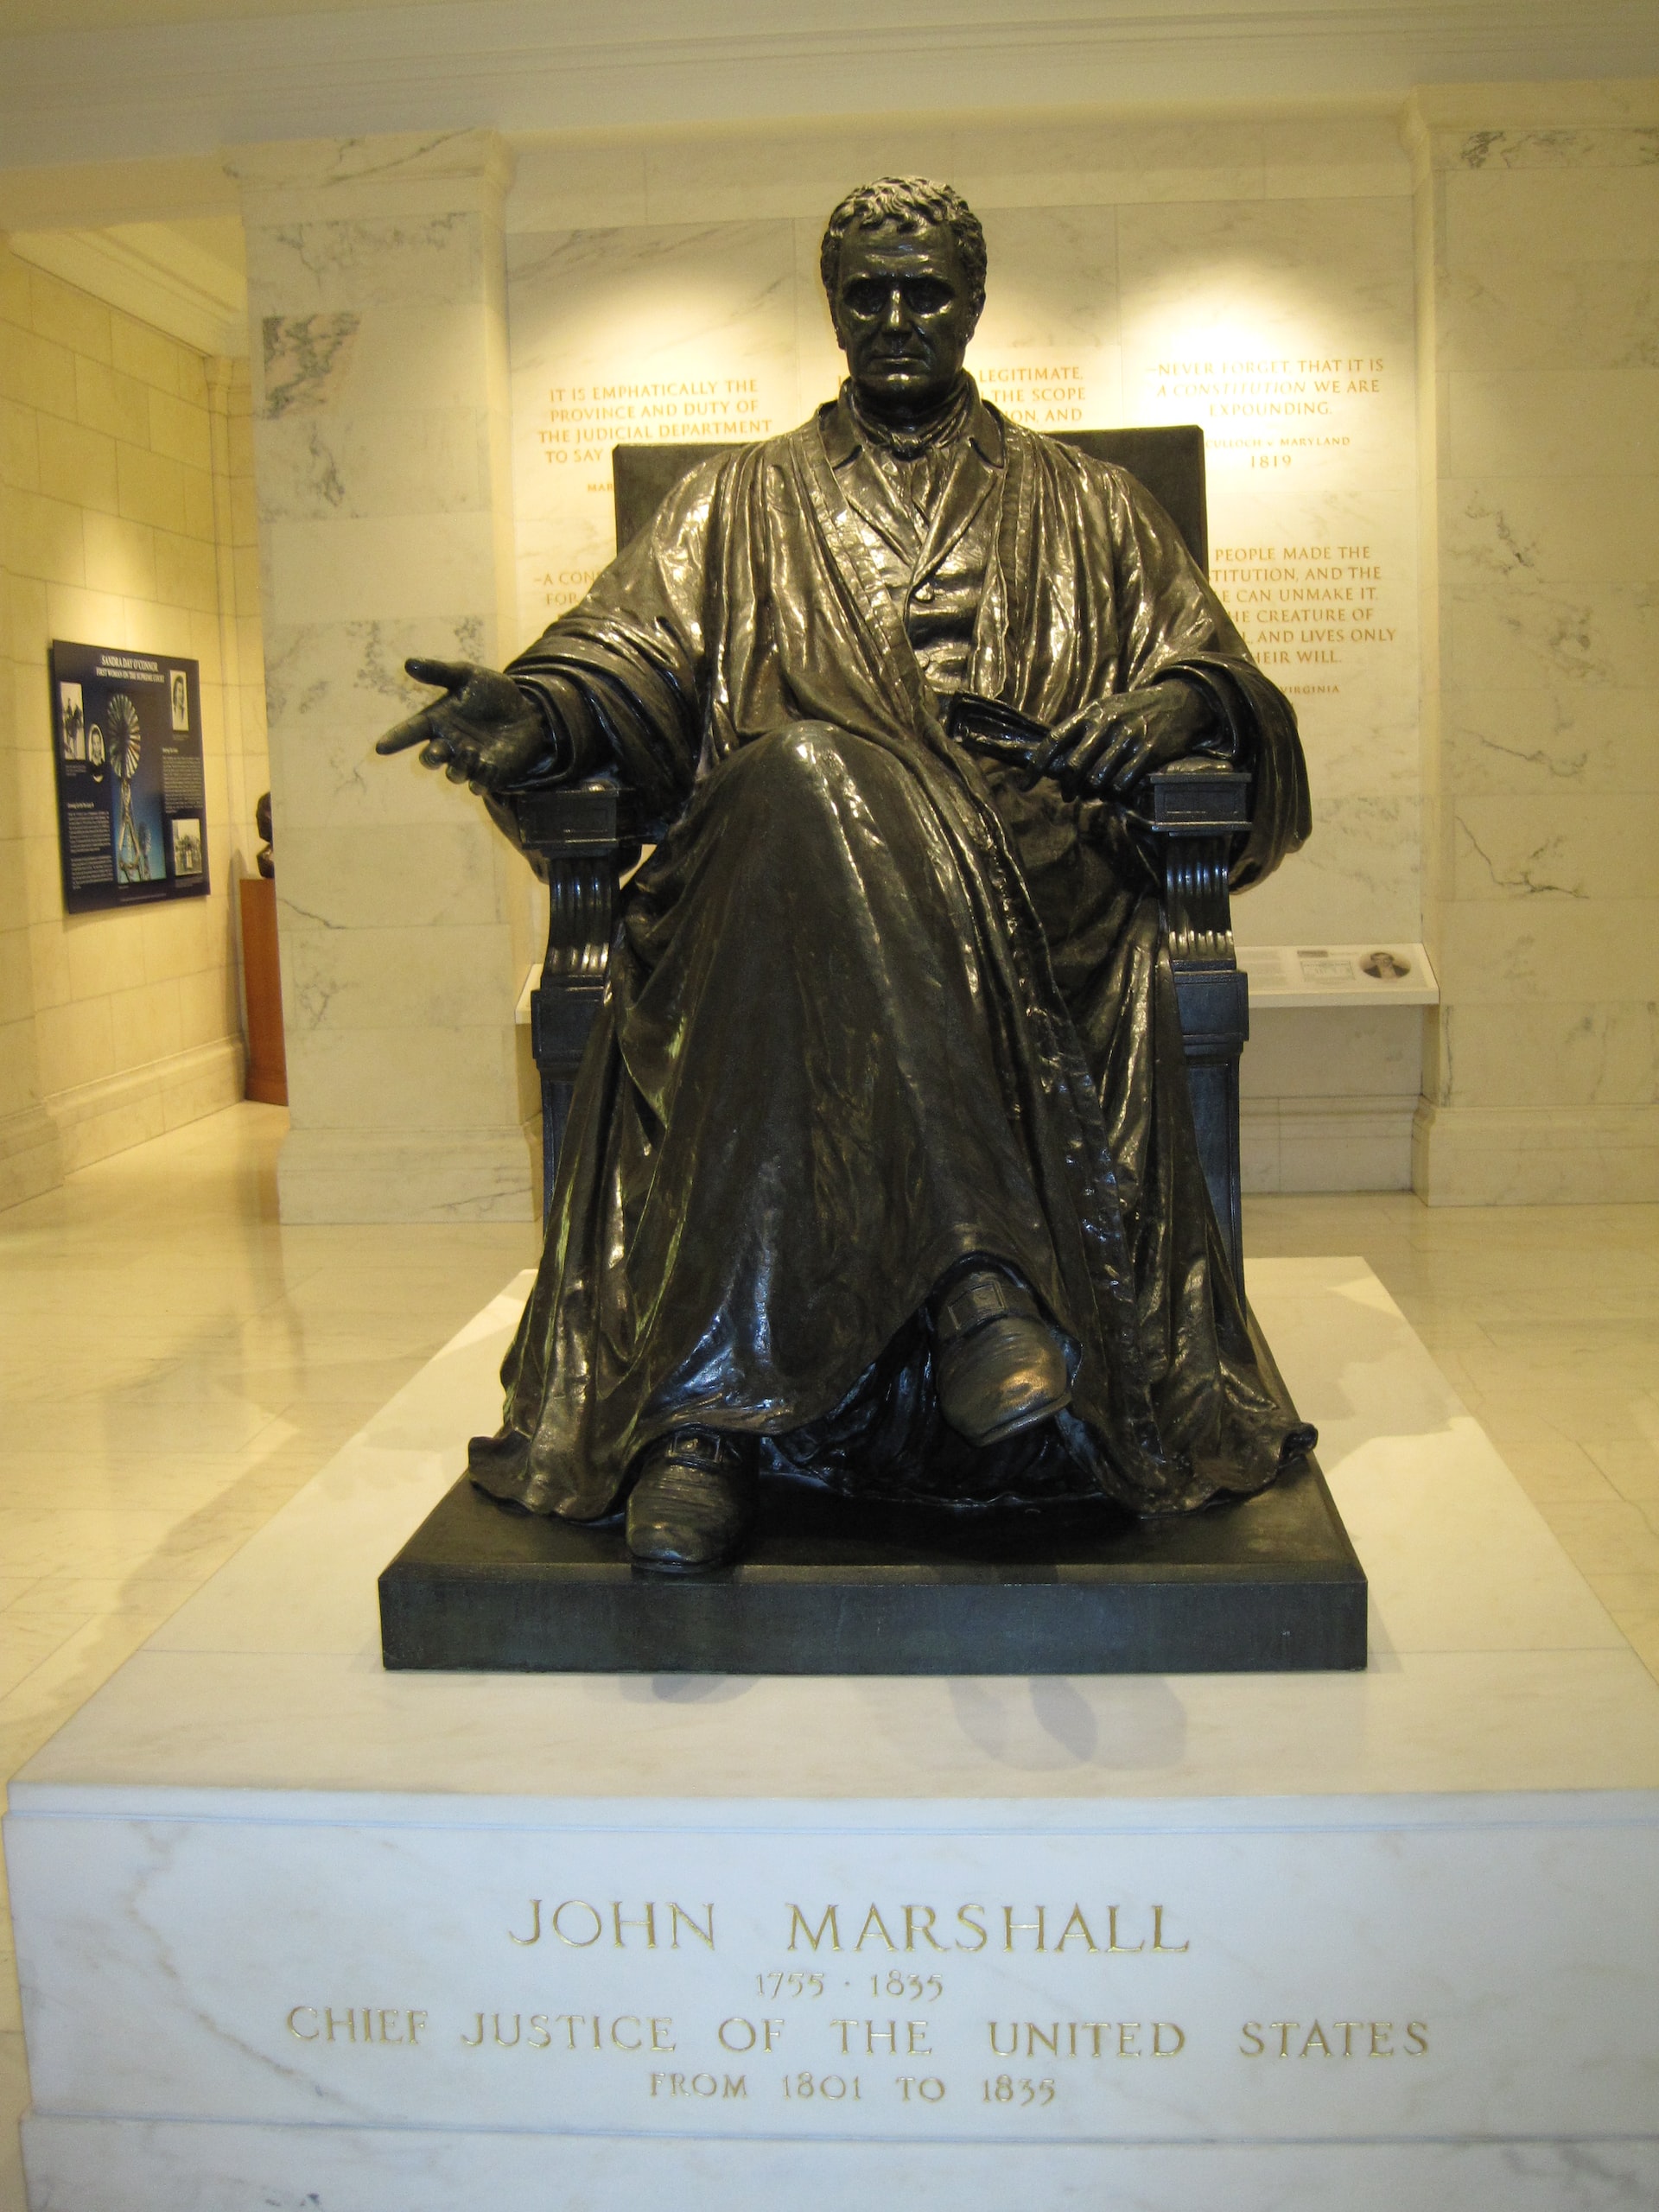 Statue of a seated Chief Justice John Marshall inside the U.S. Supreme Court building in Washington, D.C.